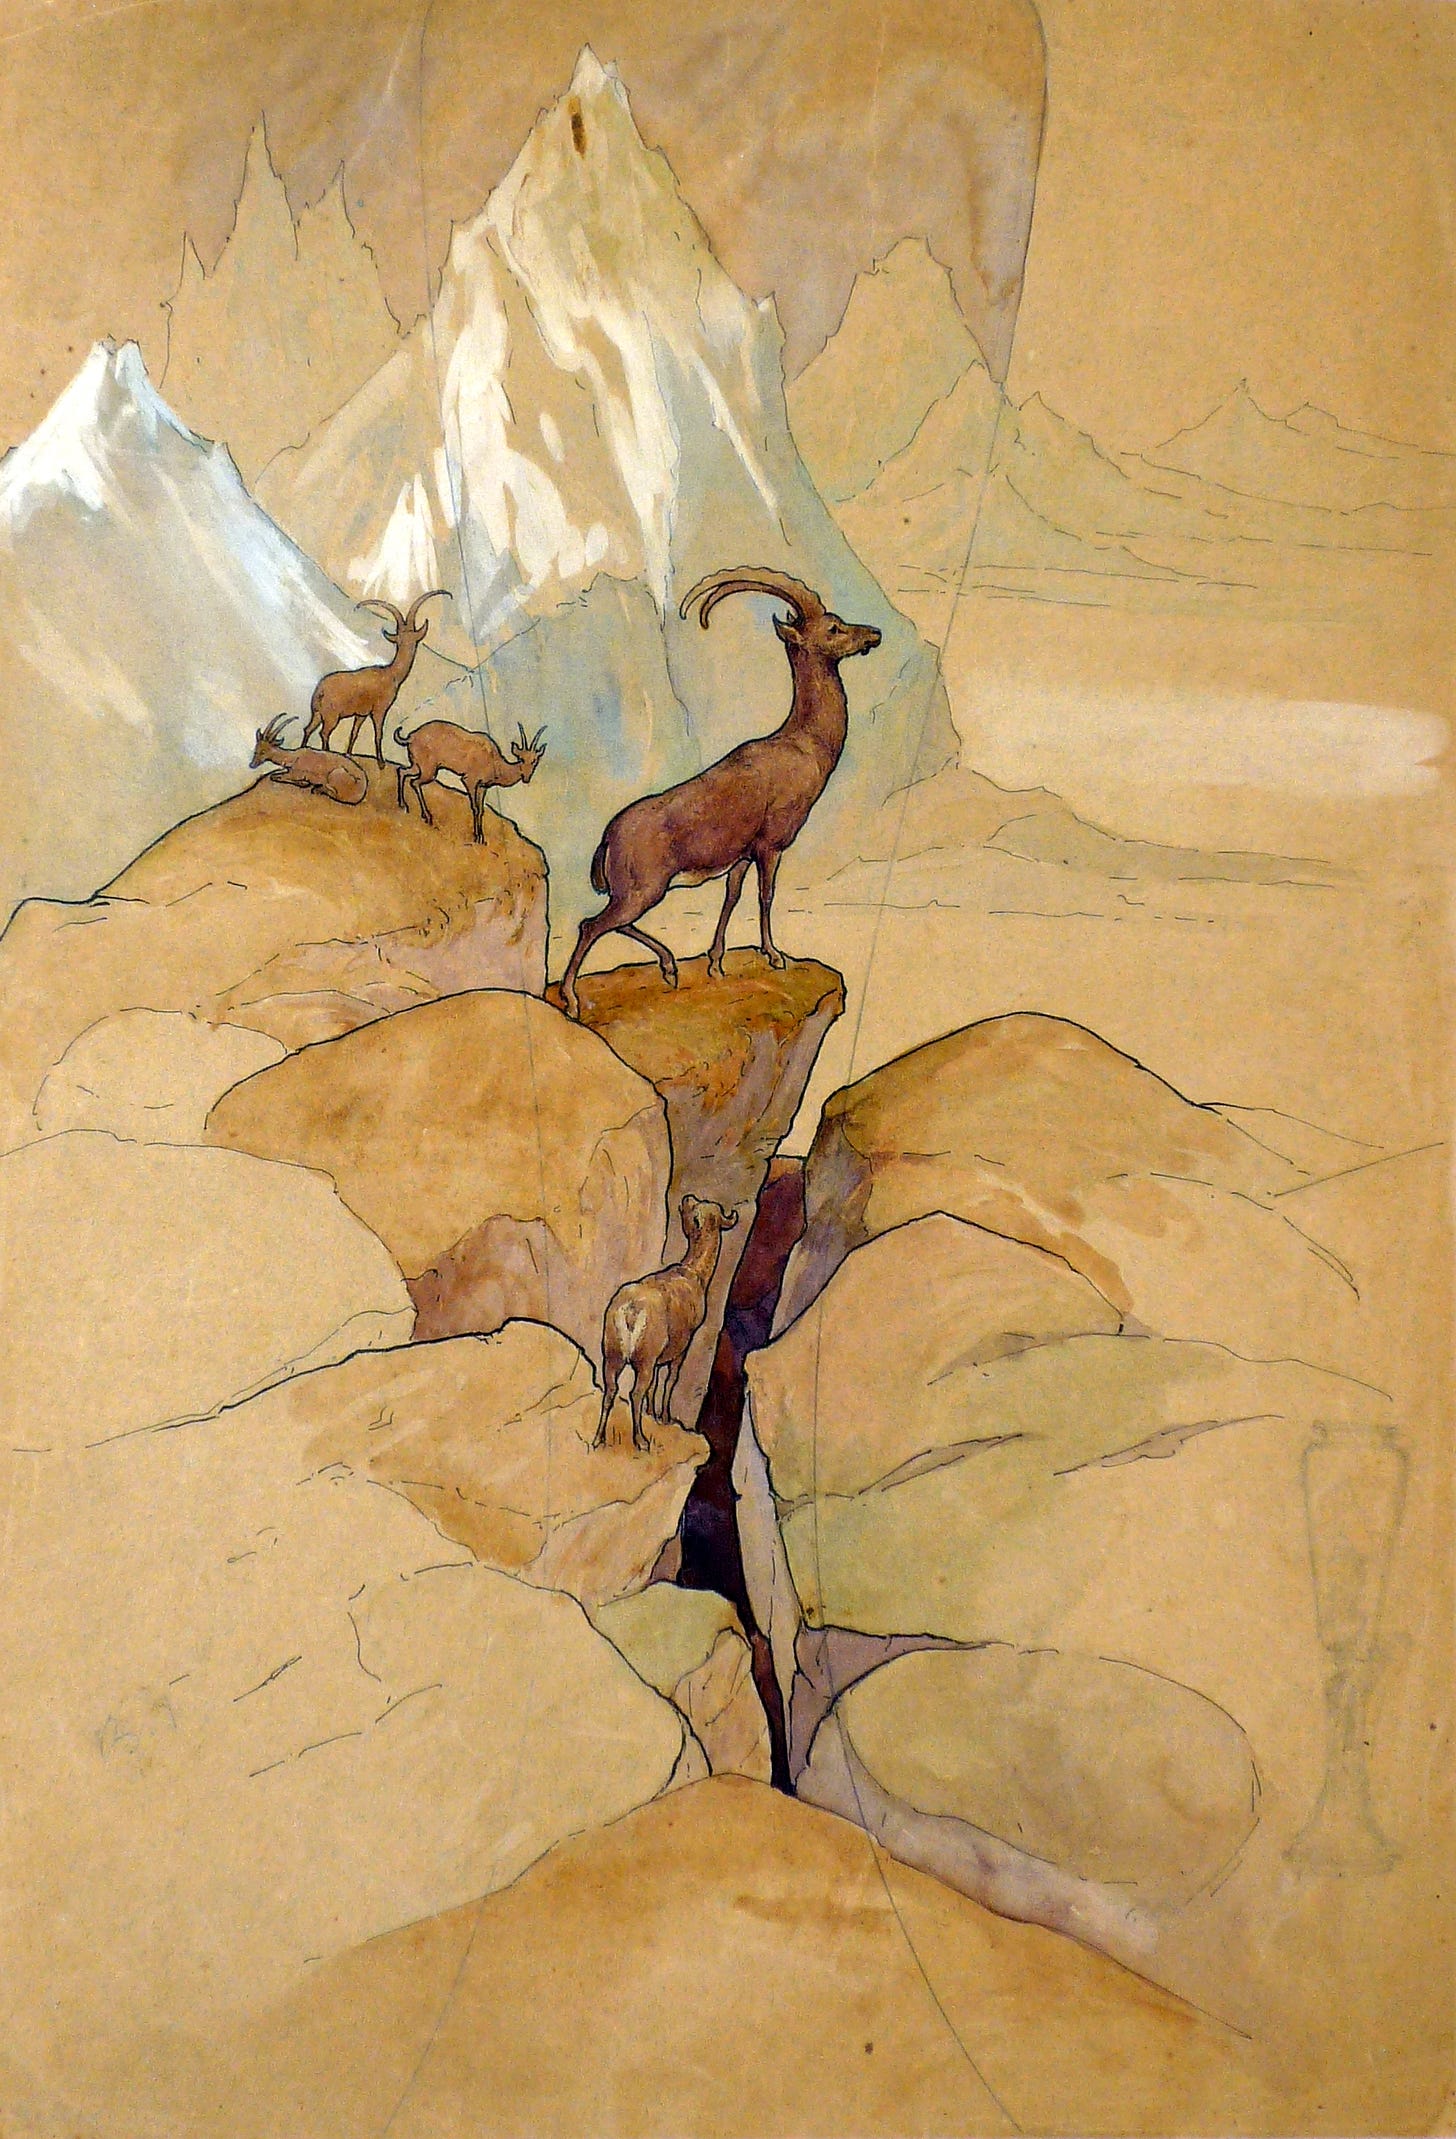 Louis Hestaux, Mountain landscape with Alpine ibex, undated, from the Jean Rouppert archives, Z148 (© Ronald Muller).